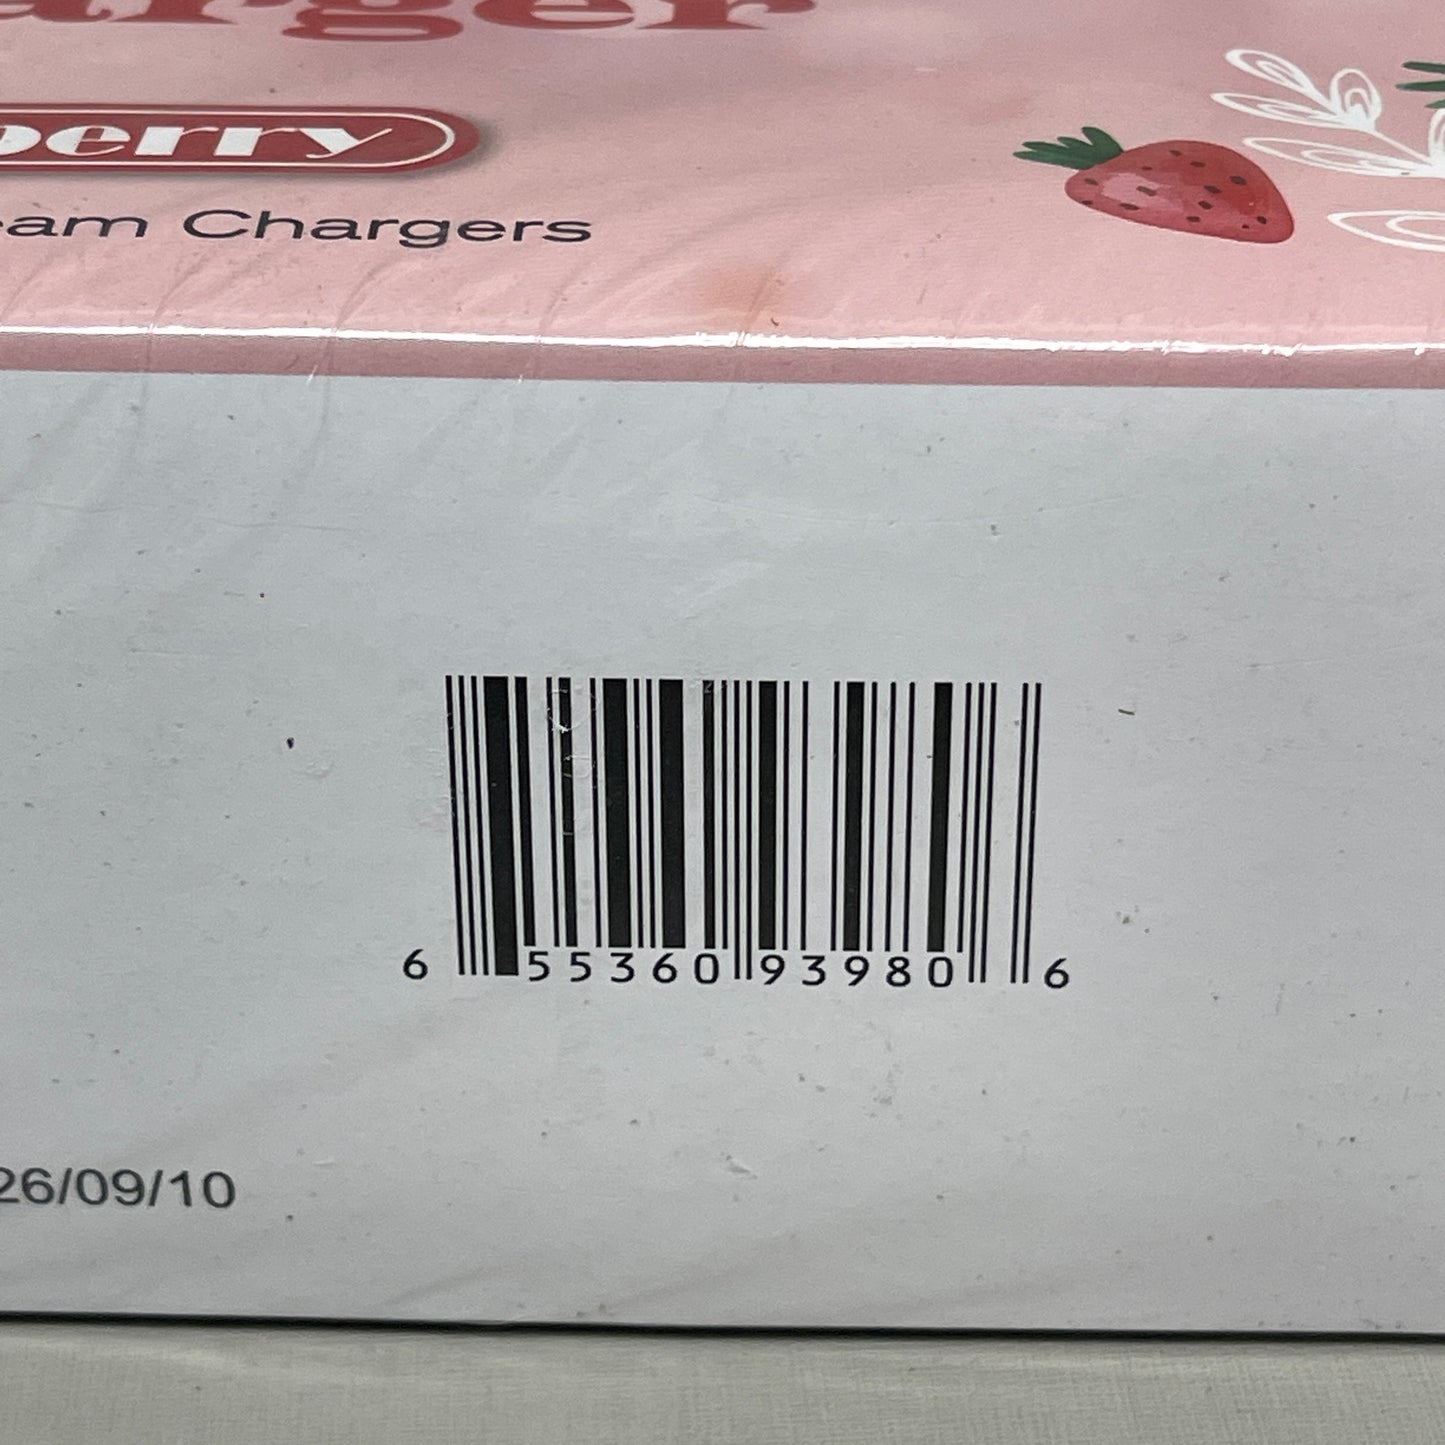 GREATWHIP Strawberry Professional Cream Chargers 50-PACK Best By 09/26 (New)